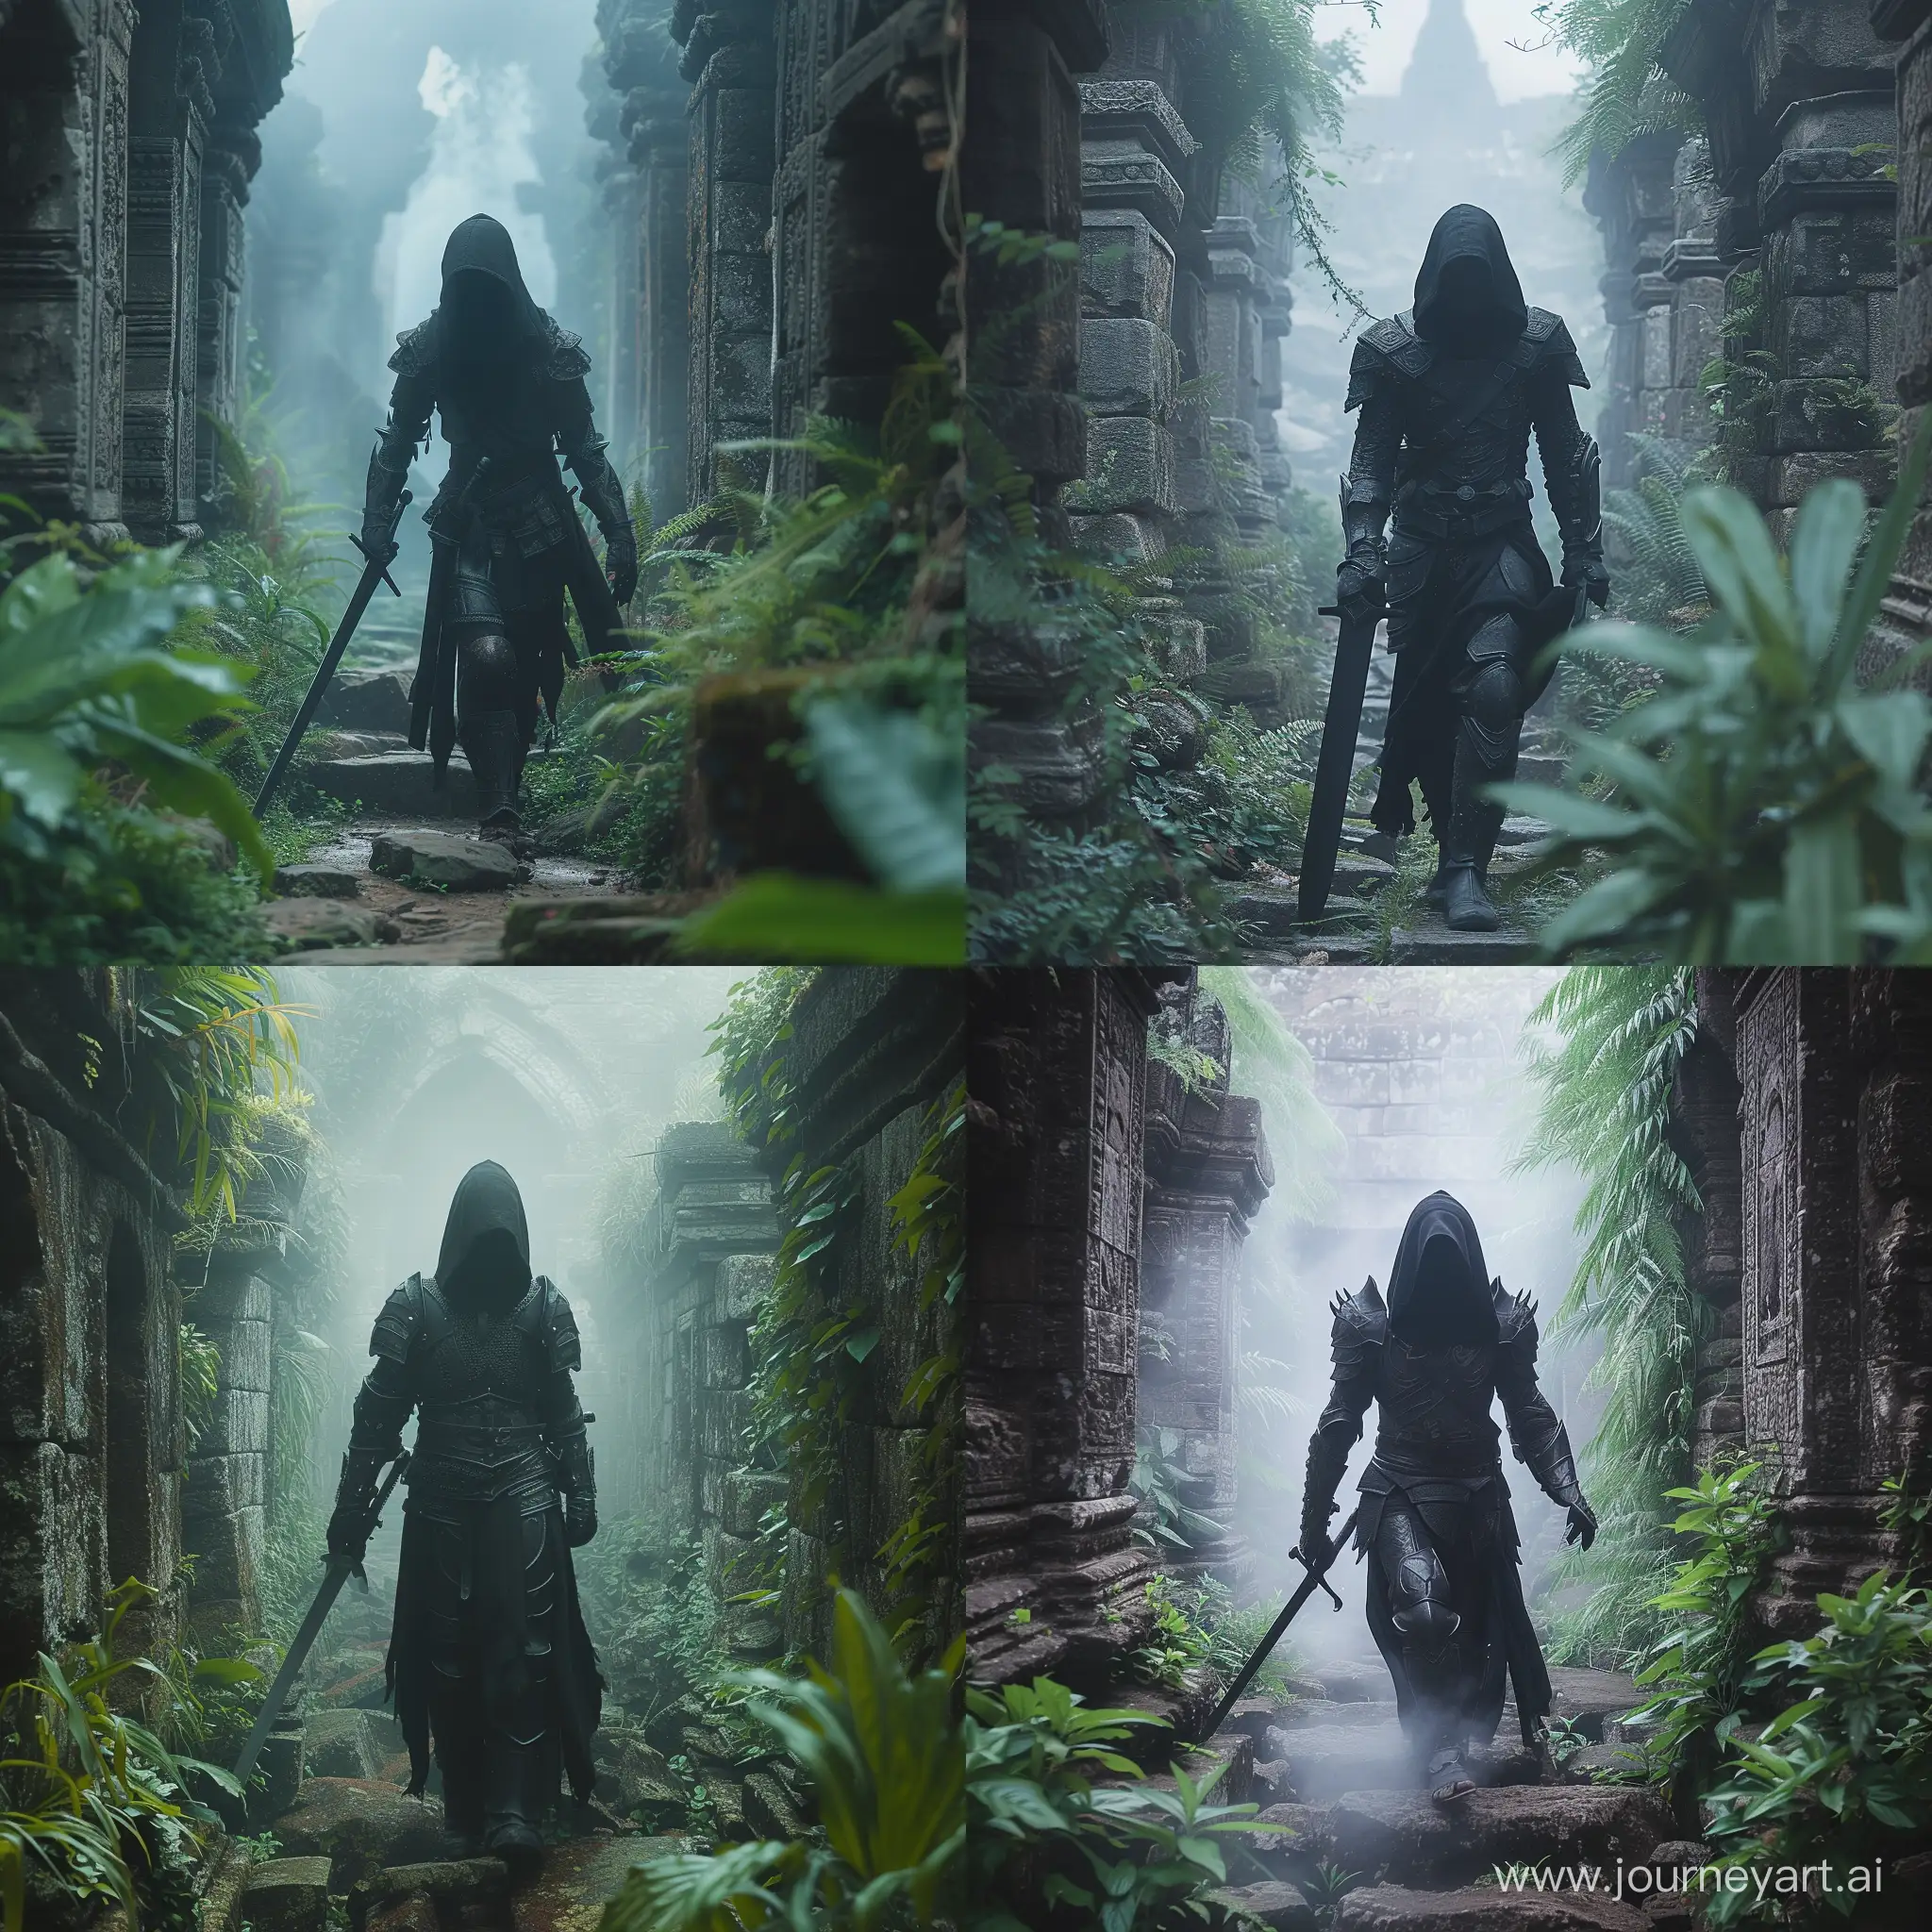  The photo shows a figure in dark armor and hood holding a sword and walking through an ancient stone corridor surrounded by vegetation. The photo has a misty atmosphere that adds to the mystery and mysticism of the setting, 